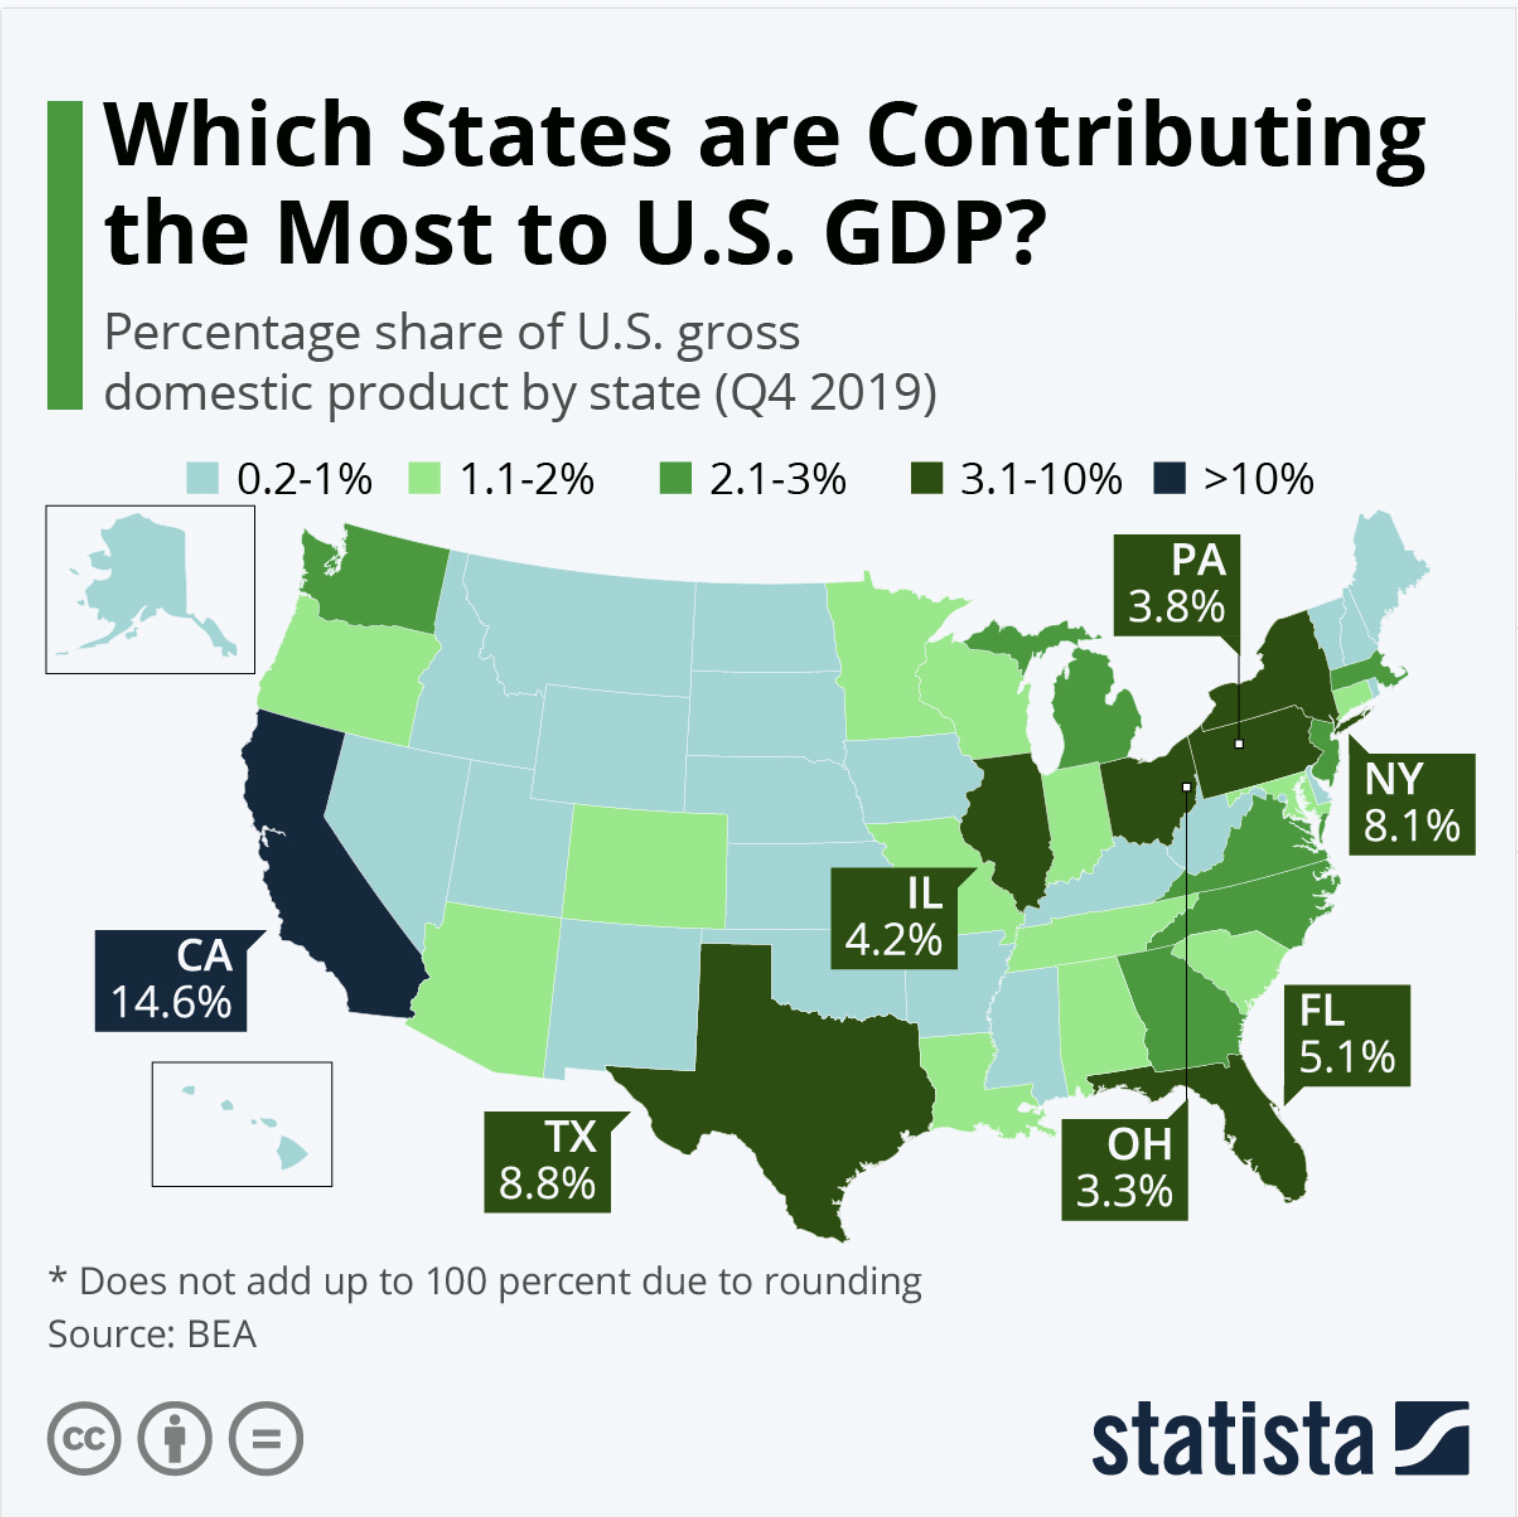 A map showing which states are contributing most to the U.S. GDP